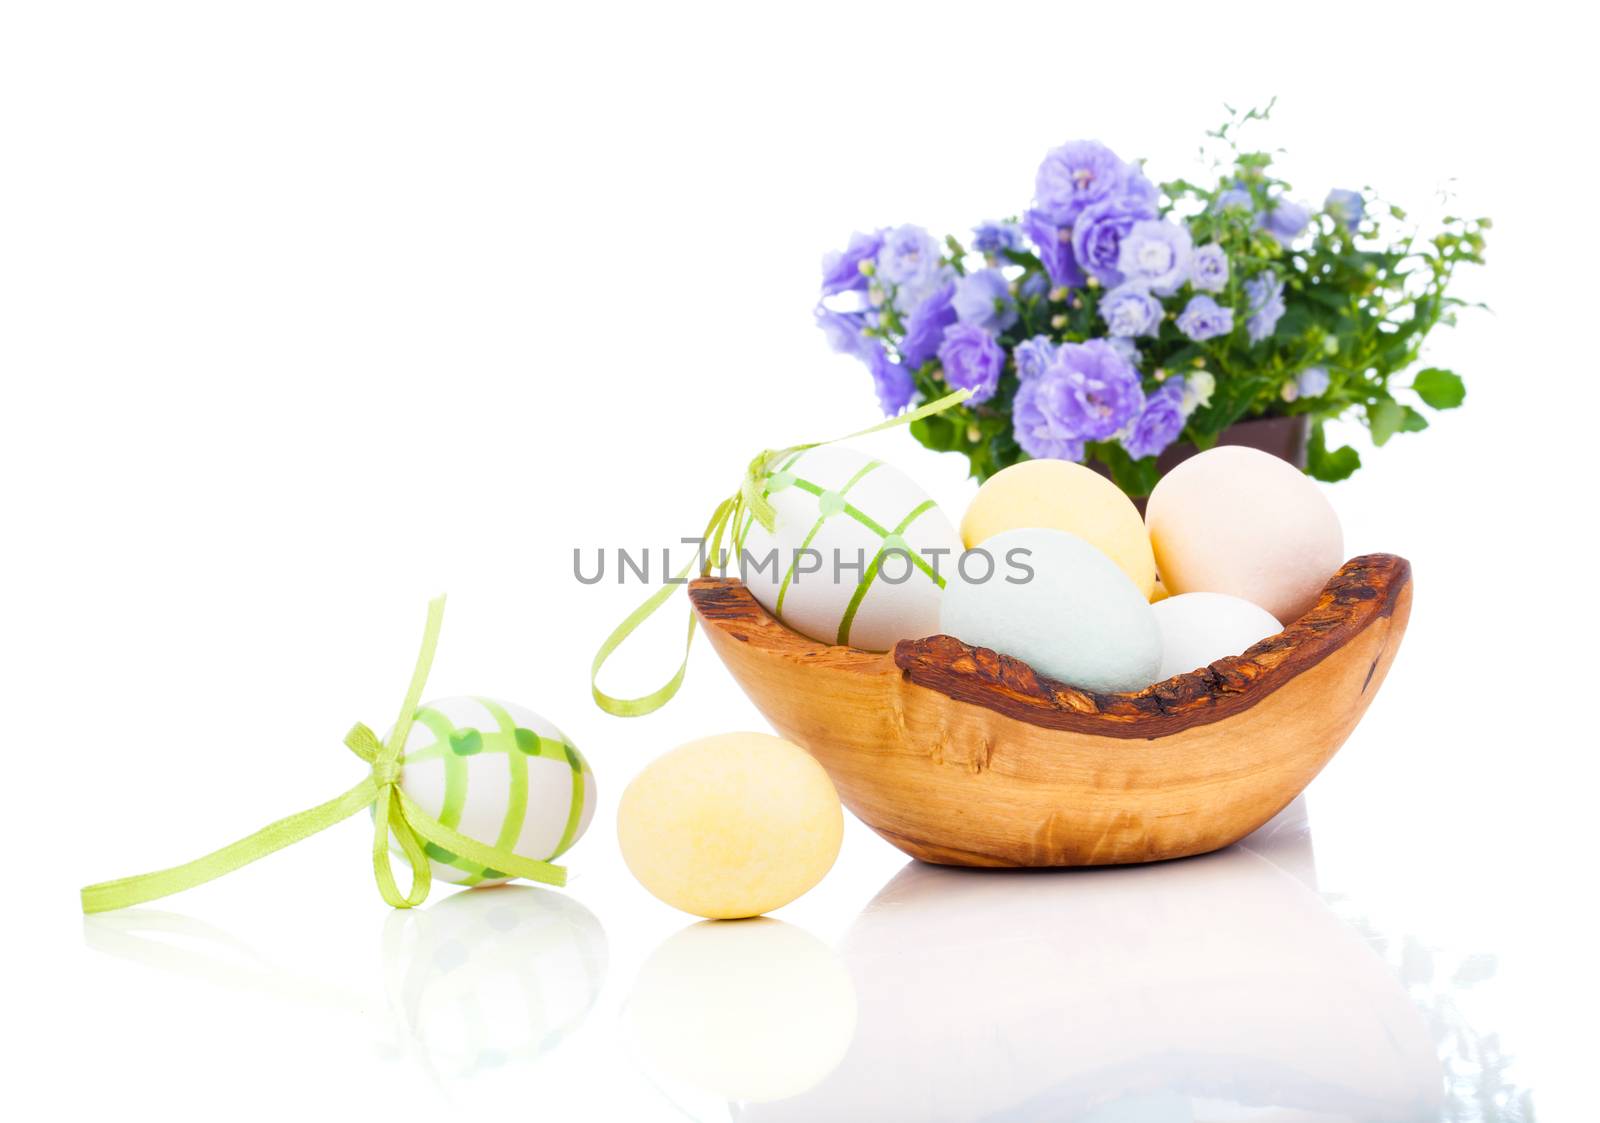 Easter eggs in wooden bowl, isolated on white background